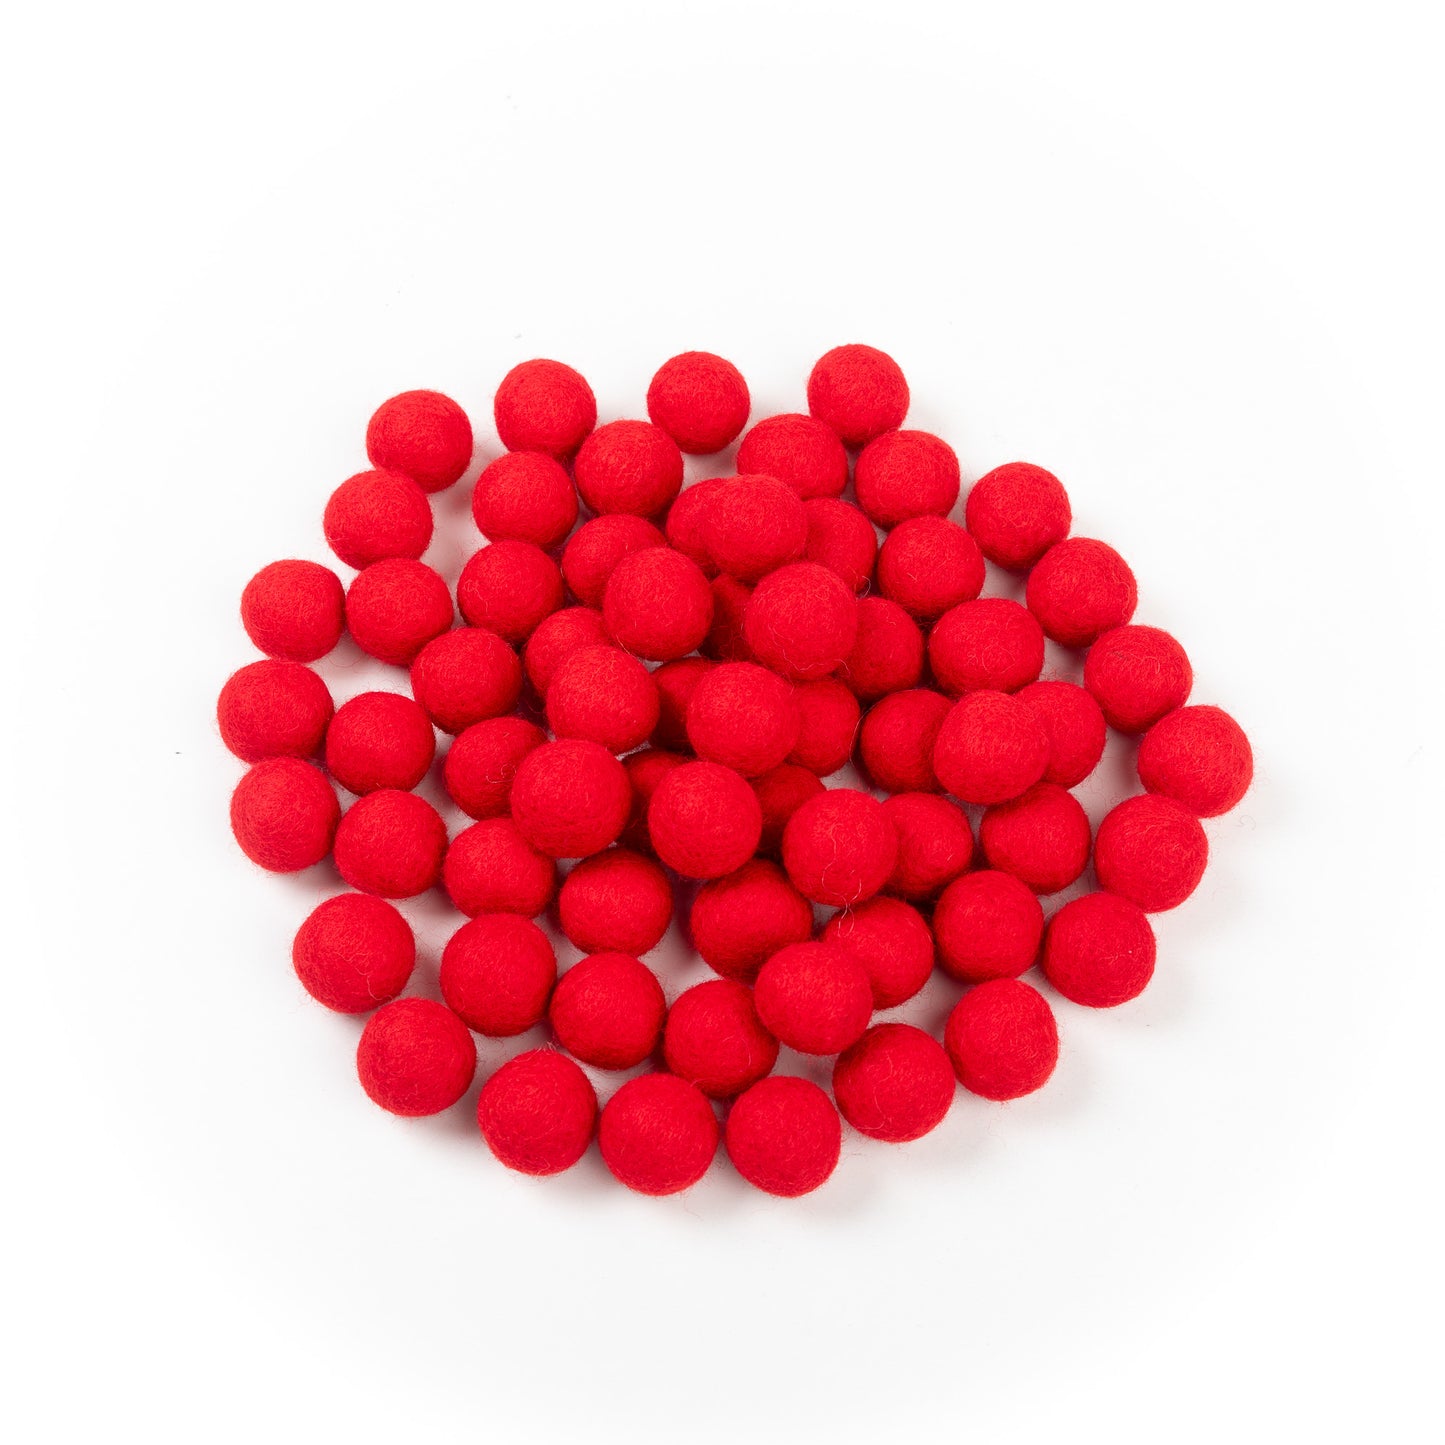 Premium Quality 2 cm Felt Balls in a Variety of Colors for Crafting